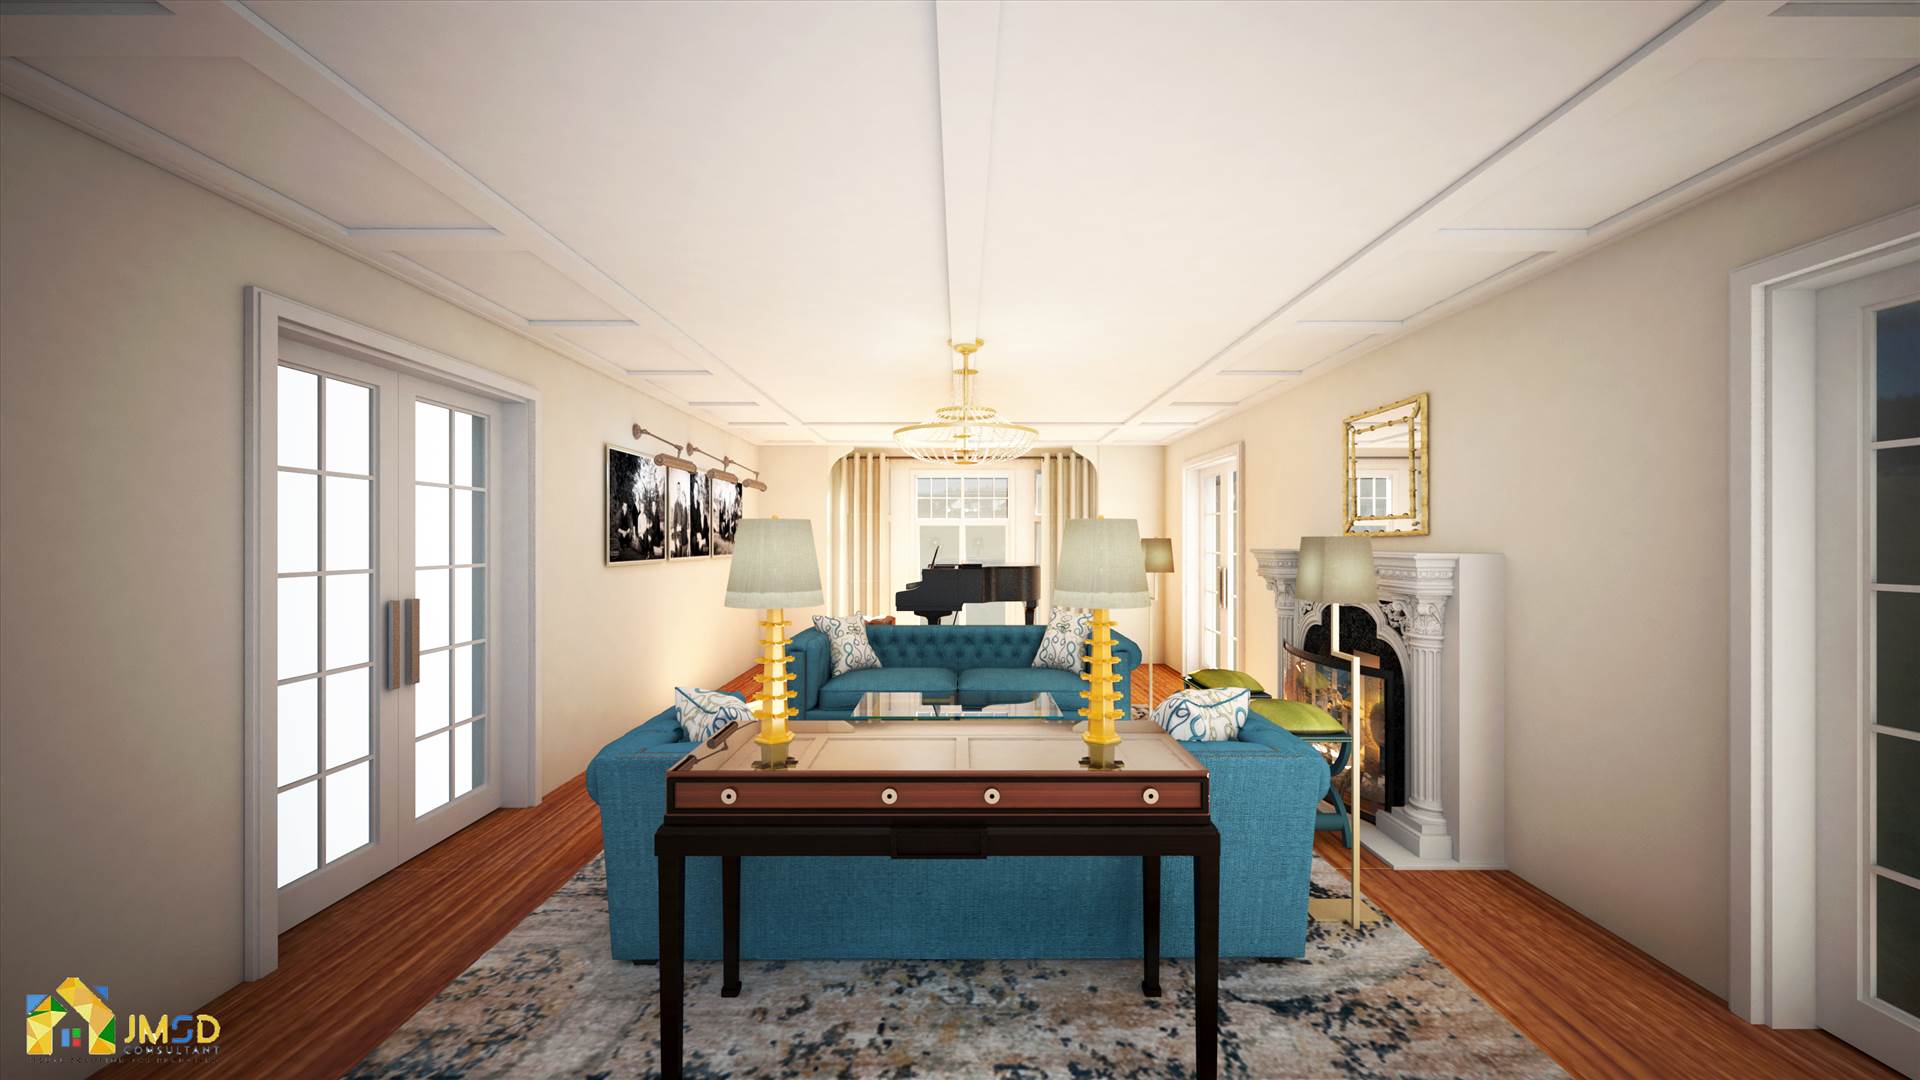 3D Interior Rendering Services NYC 3D Interior Rendering Services by JMSDCONSULTANT